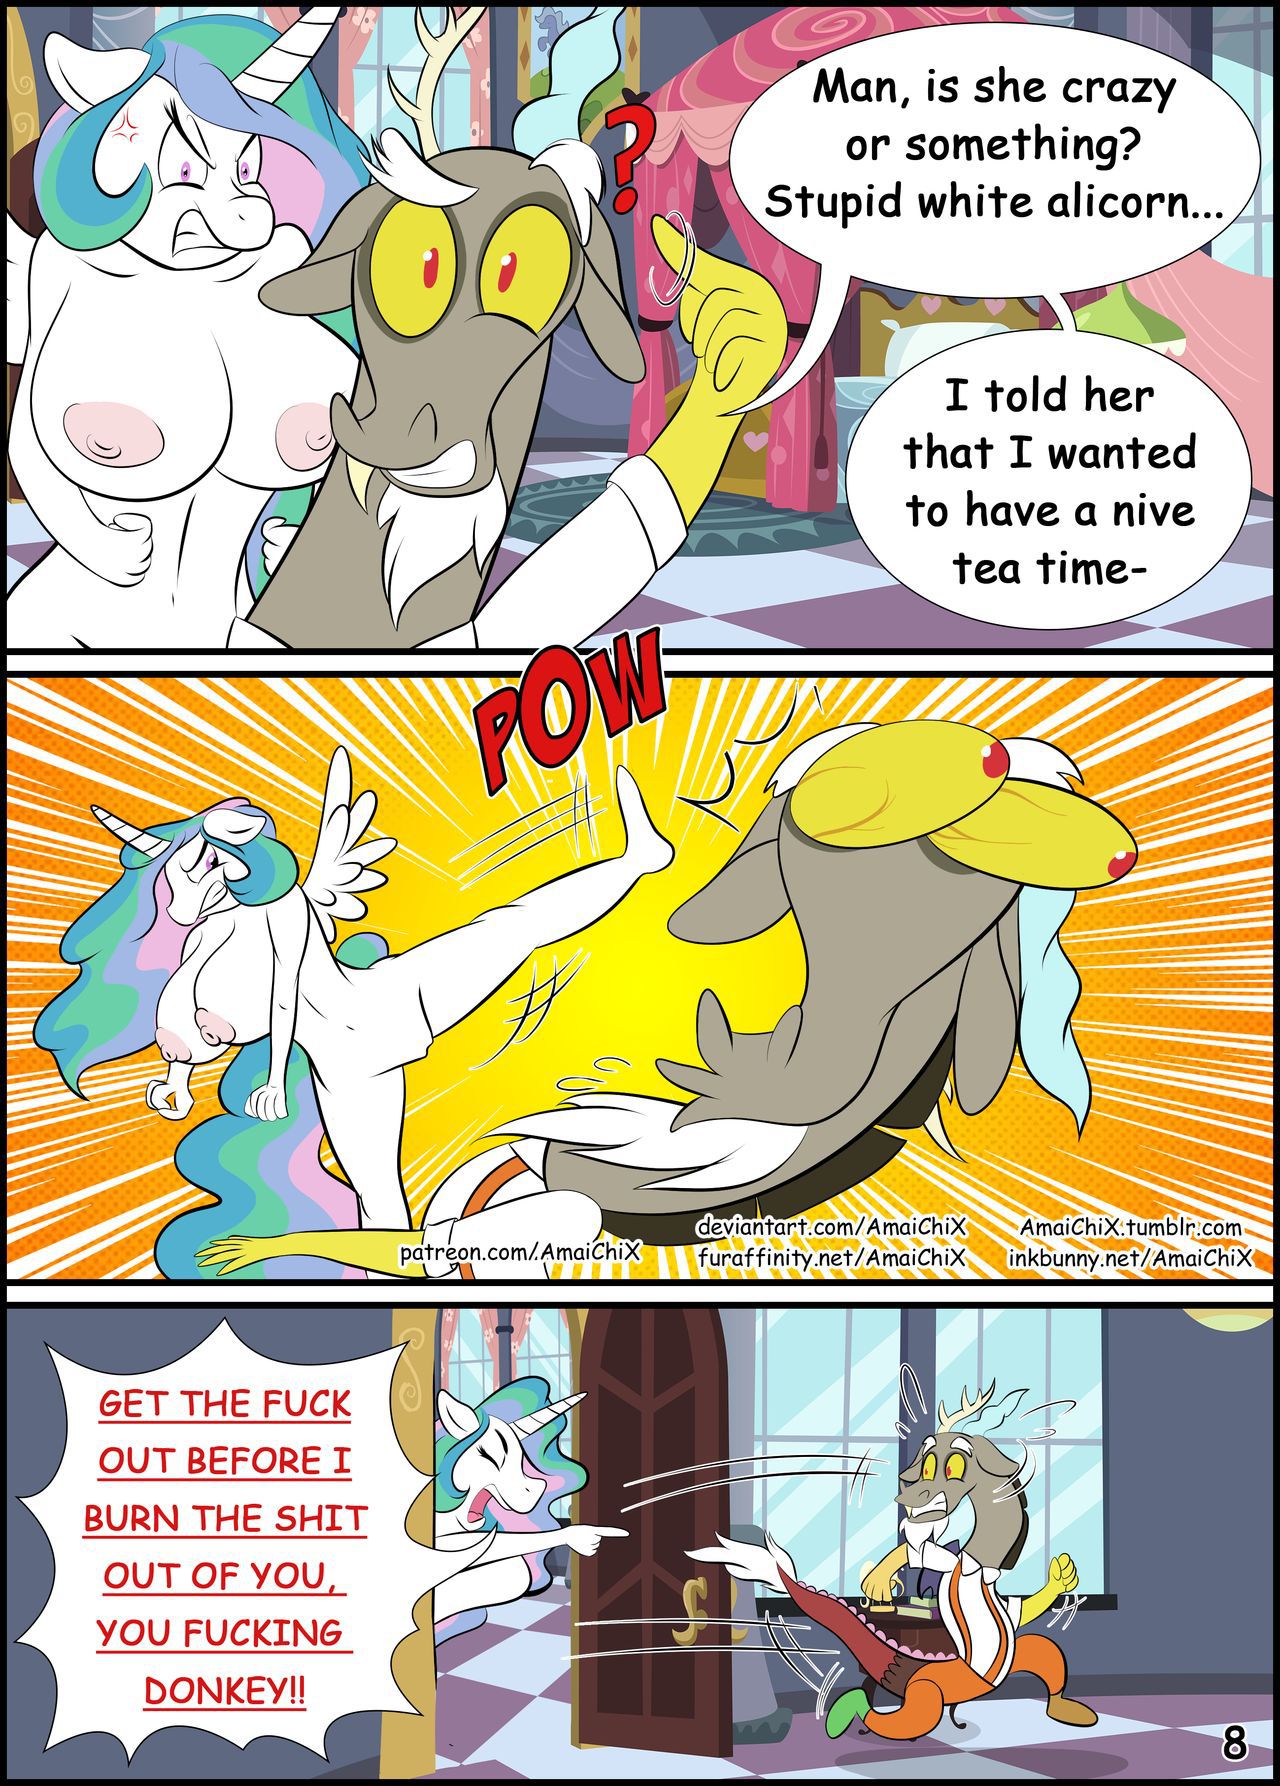 [AmaiChiX] Teat Party (My Little Pony Friendship Is Magic) [Ongoing] 9